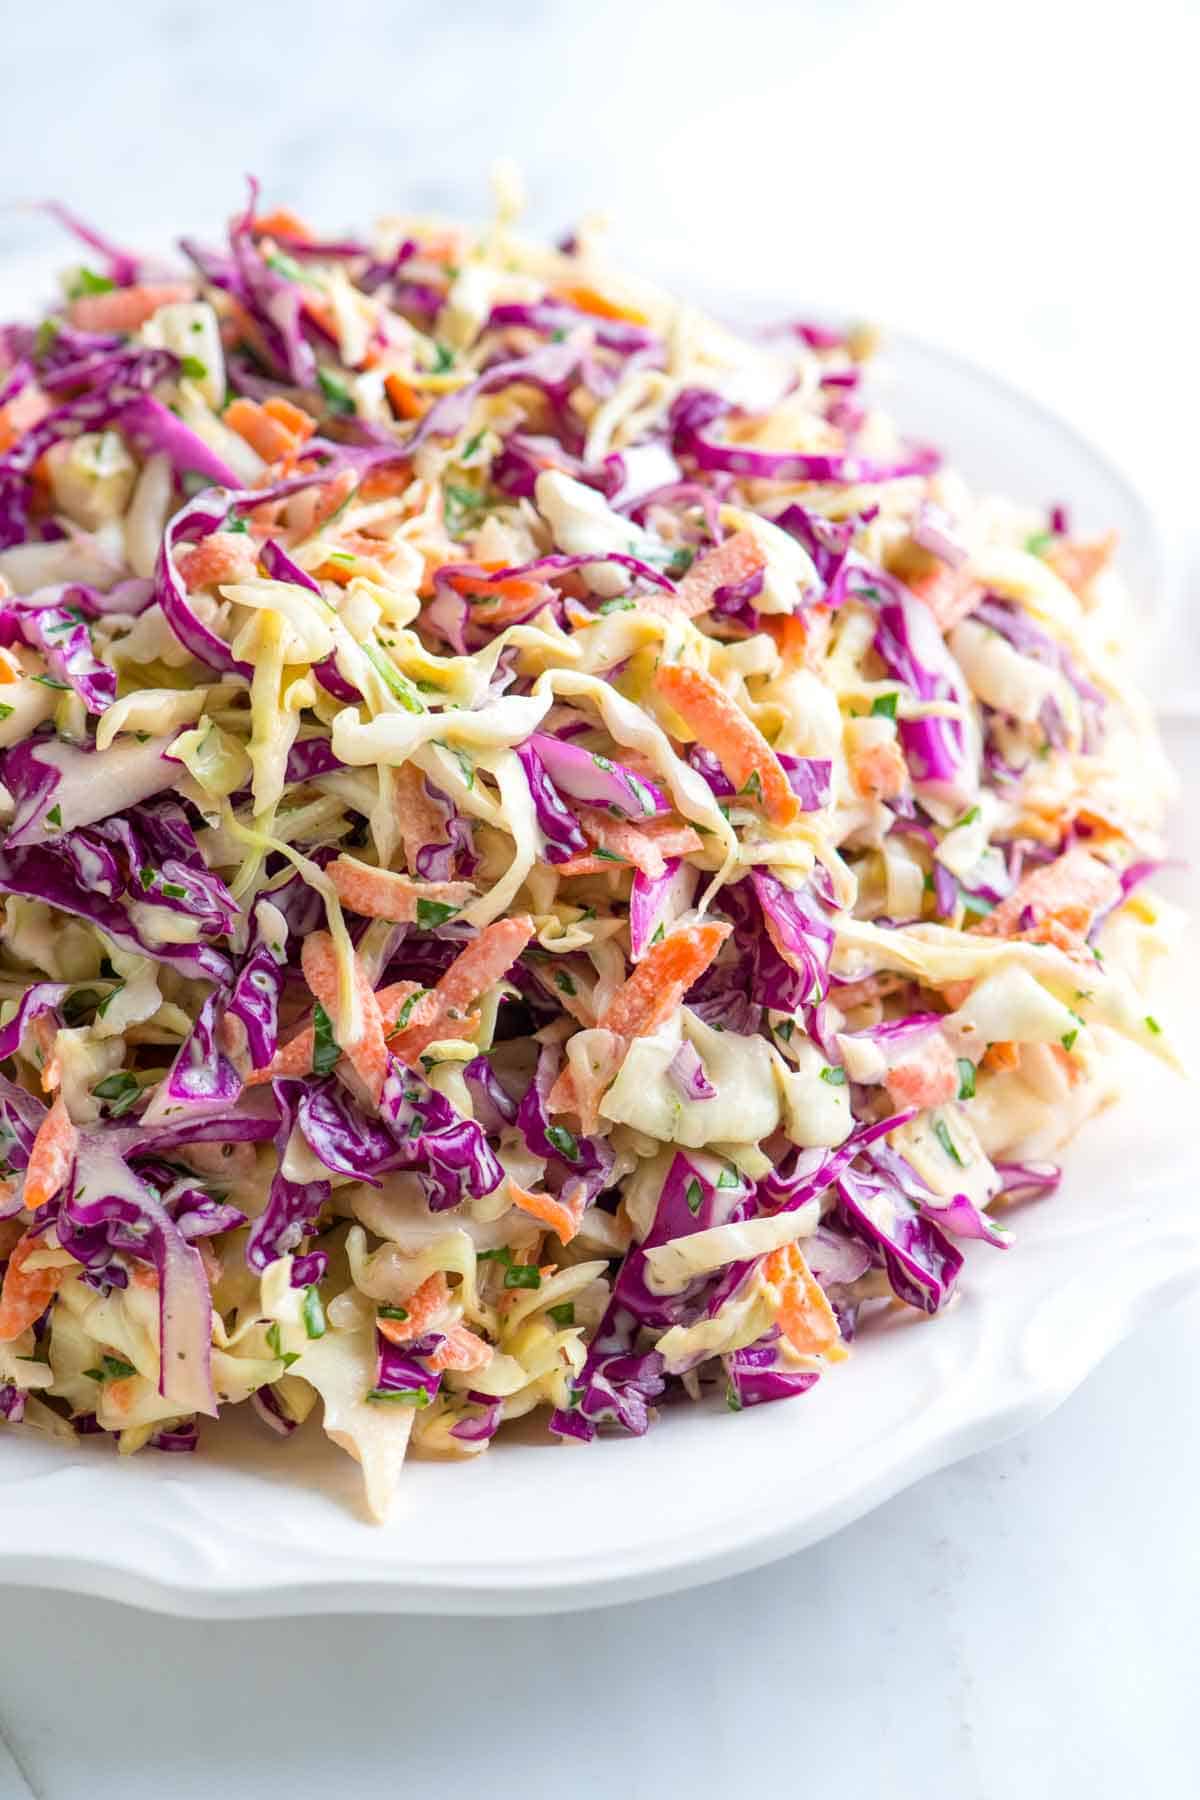 how do i make diet slaw from scratch